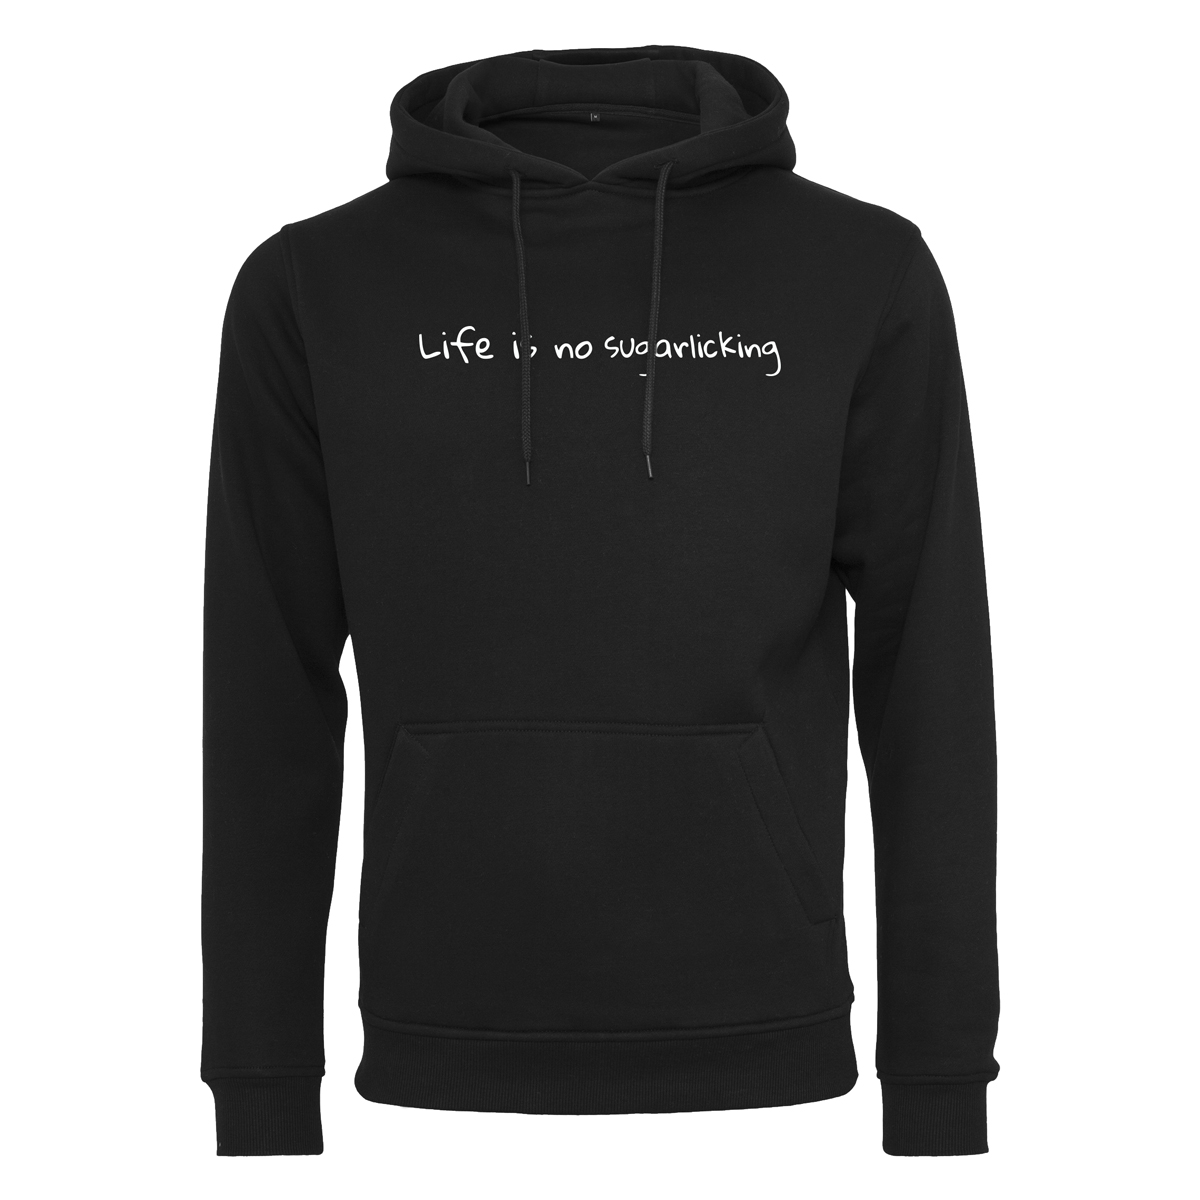 Life is Holla sugarlicking Woodfairy - Merchandise no | The Hoodie 